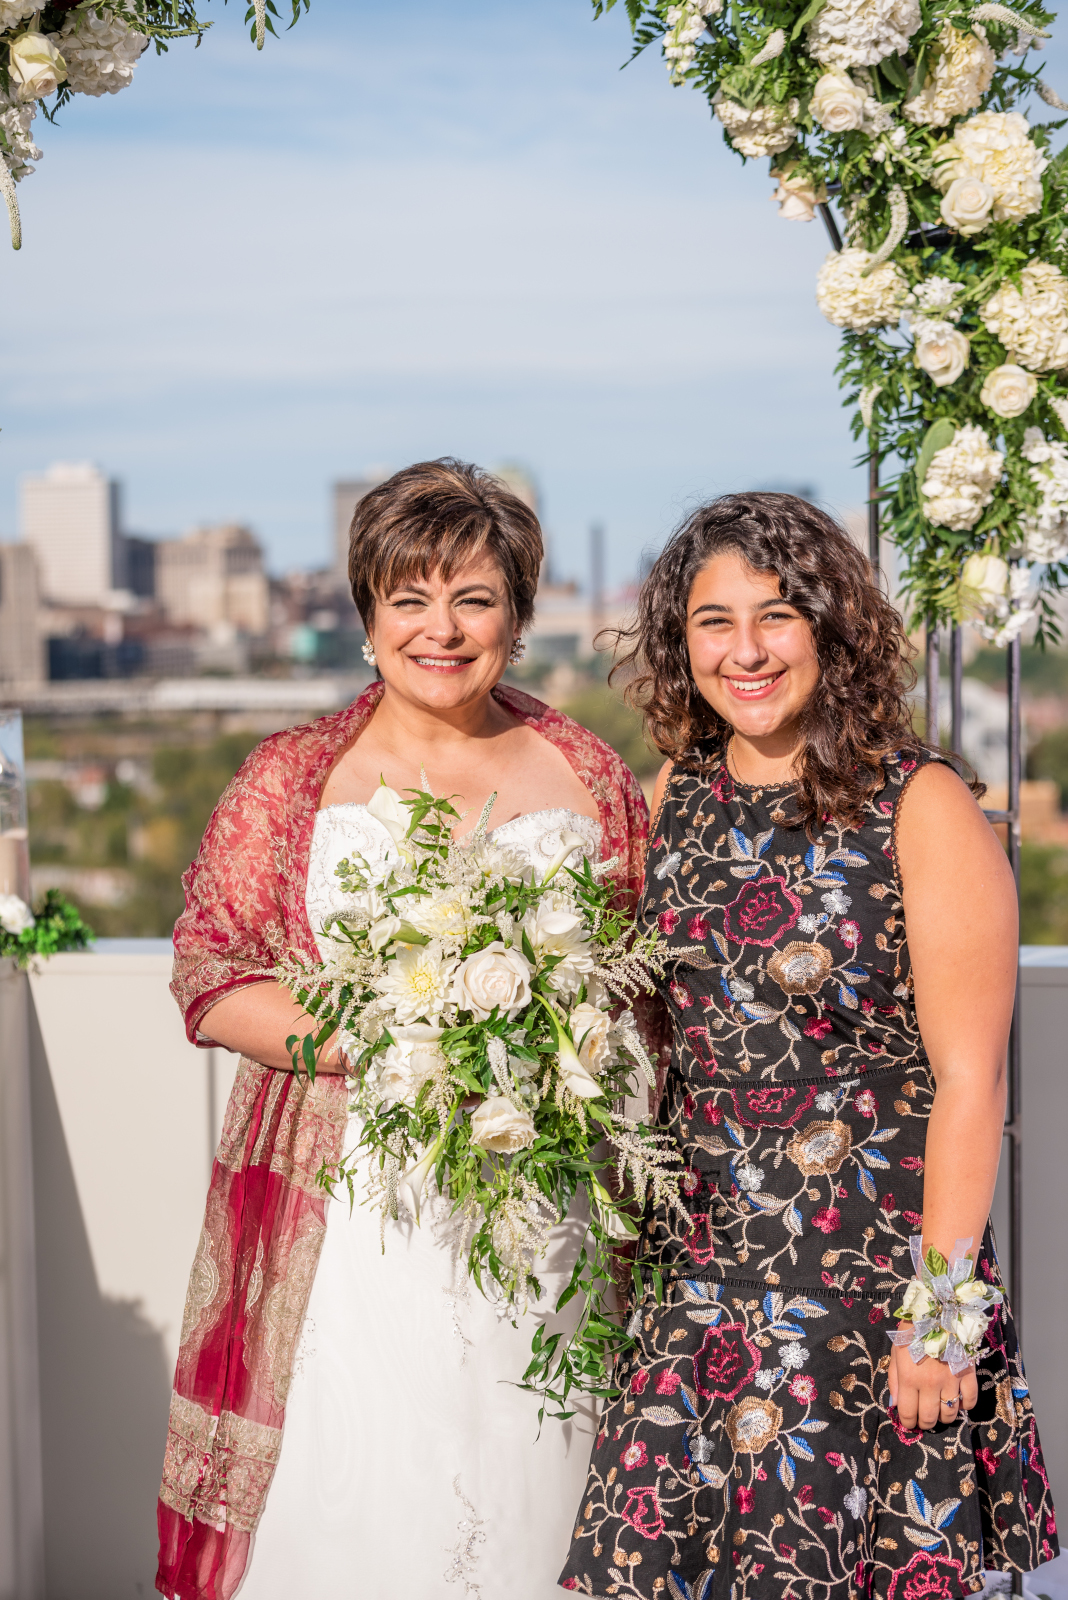 Bride with young girl, family portrait, older couple, romantic outdoor urban wedding ceremony at Penthouse Events, Ohio City, Cleveland Flats, downtown Cleveland skyline